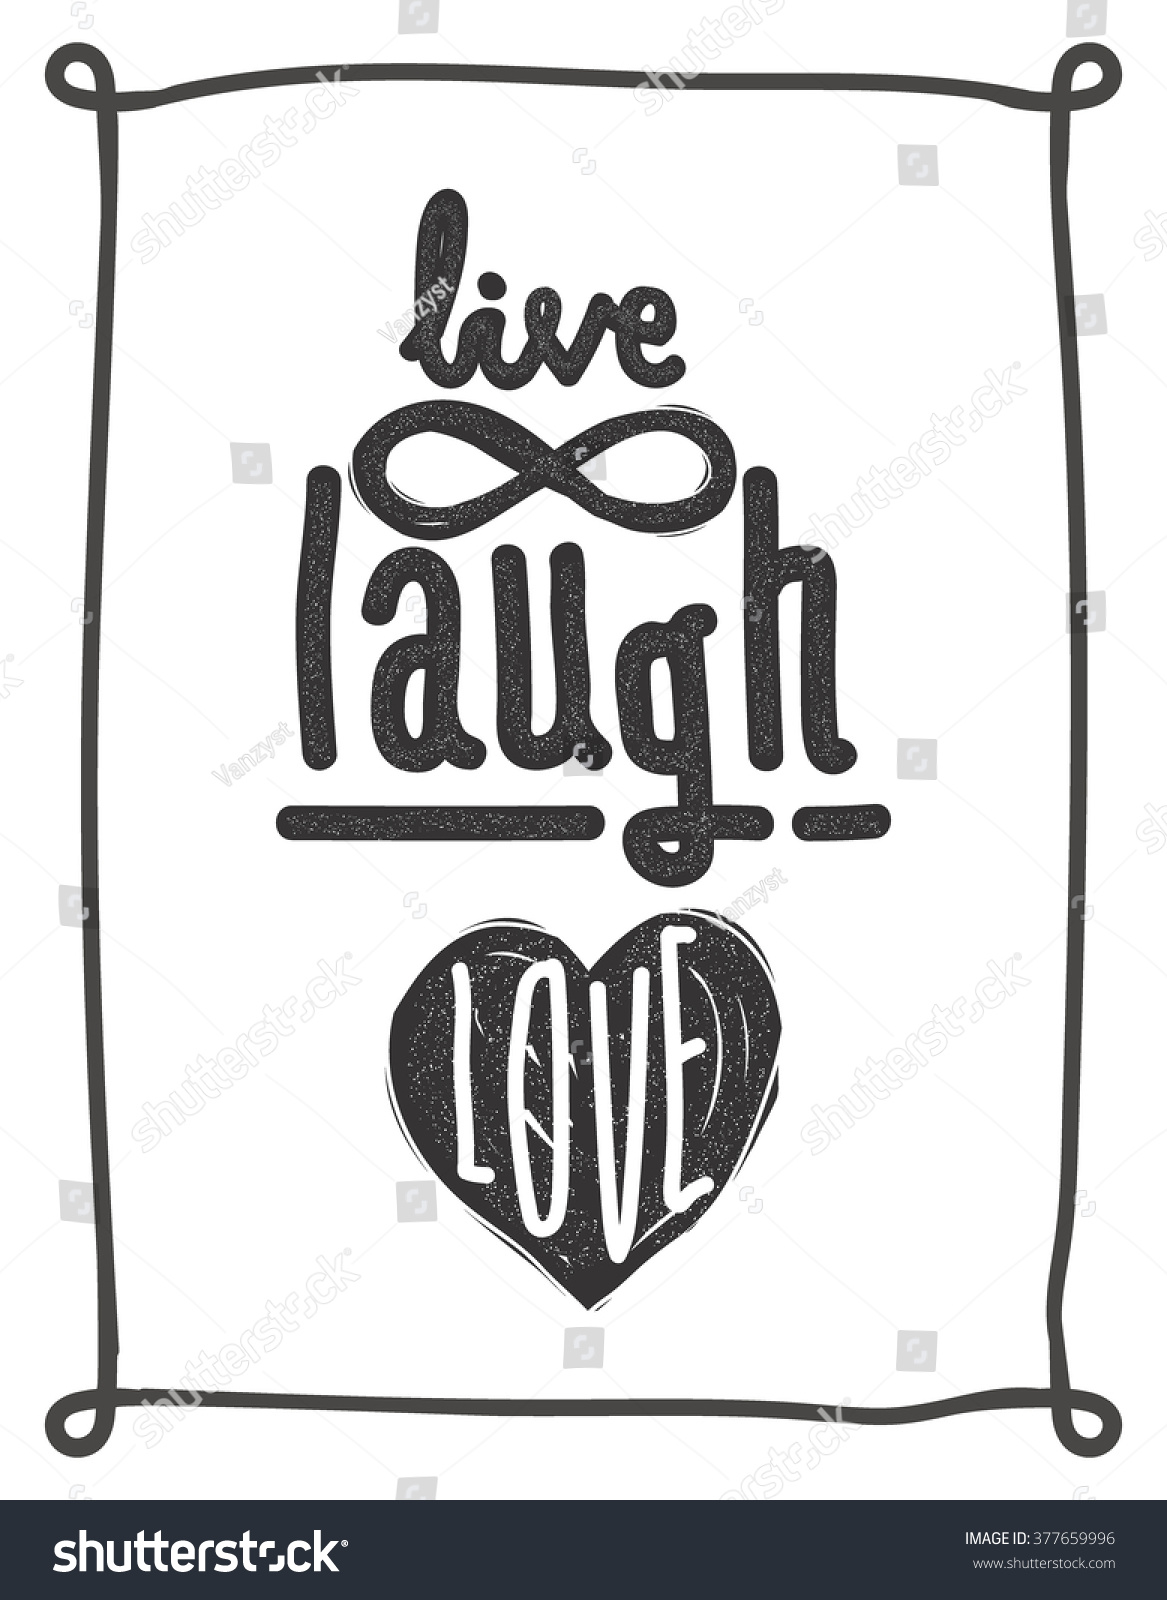 Live laugh love Simple lettering quote with chaotic brush effect Universal youthful